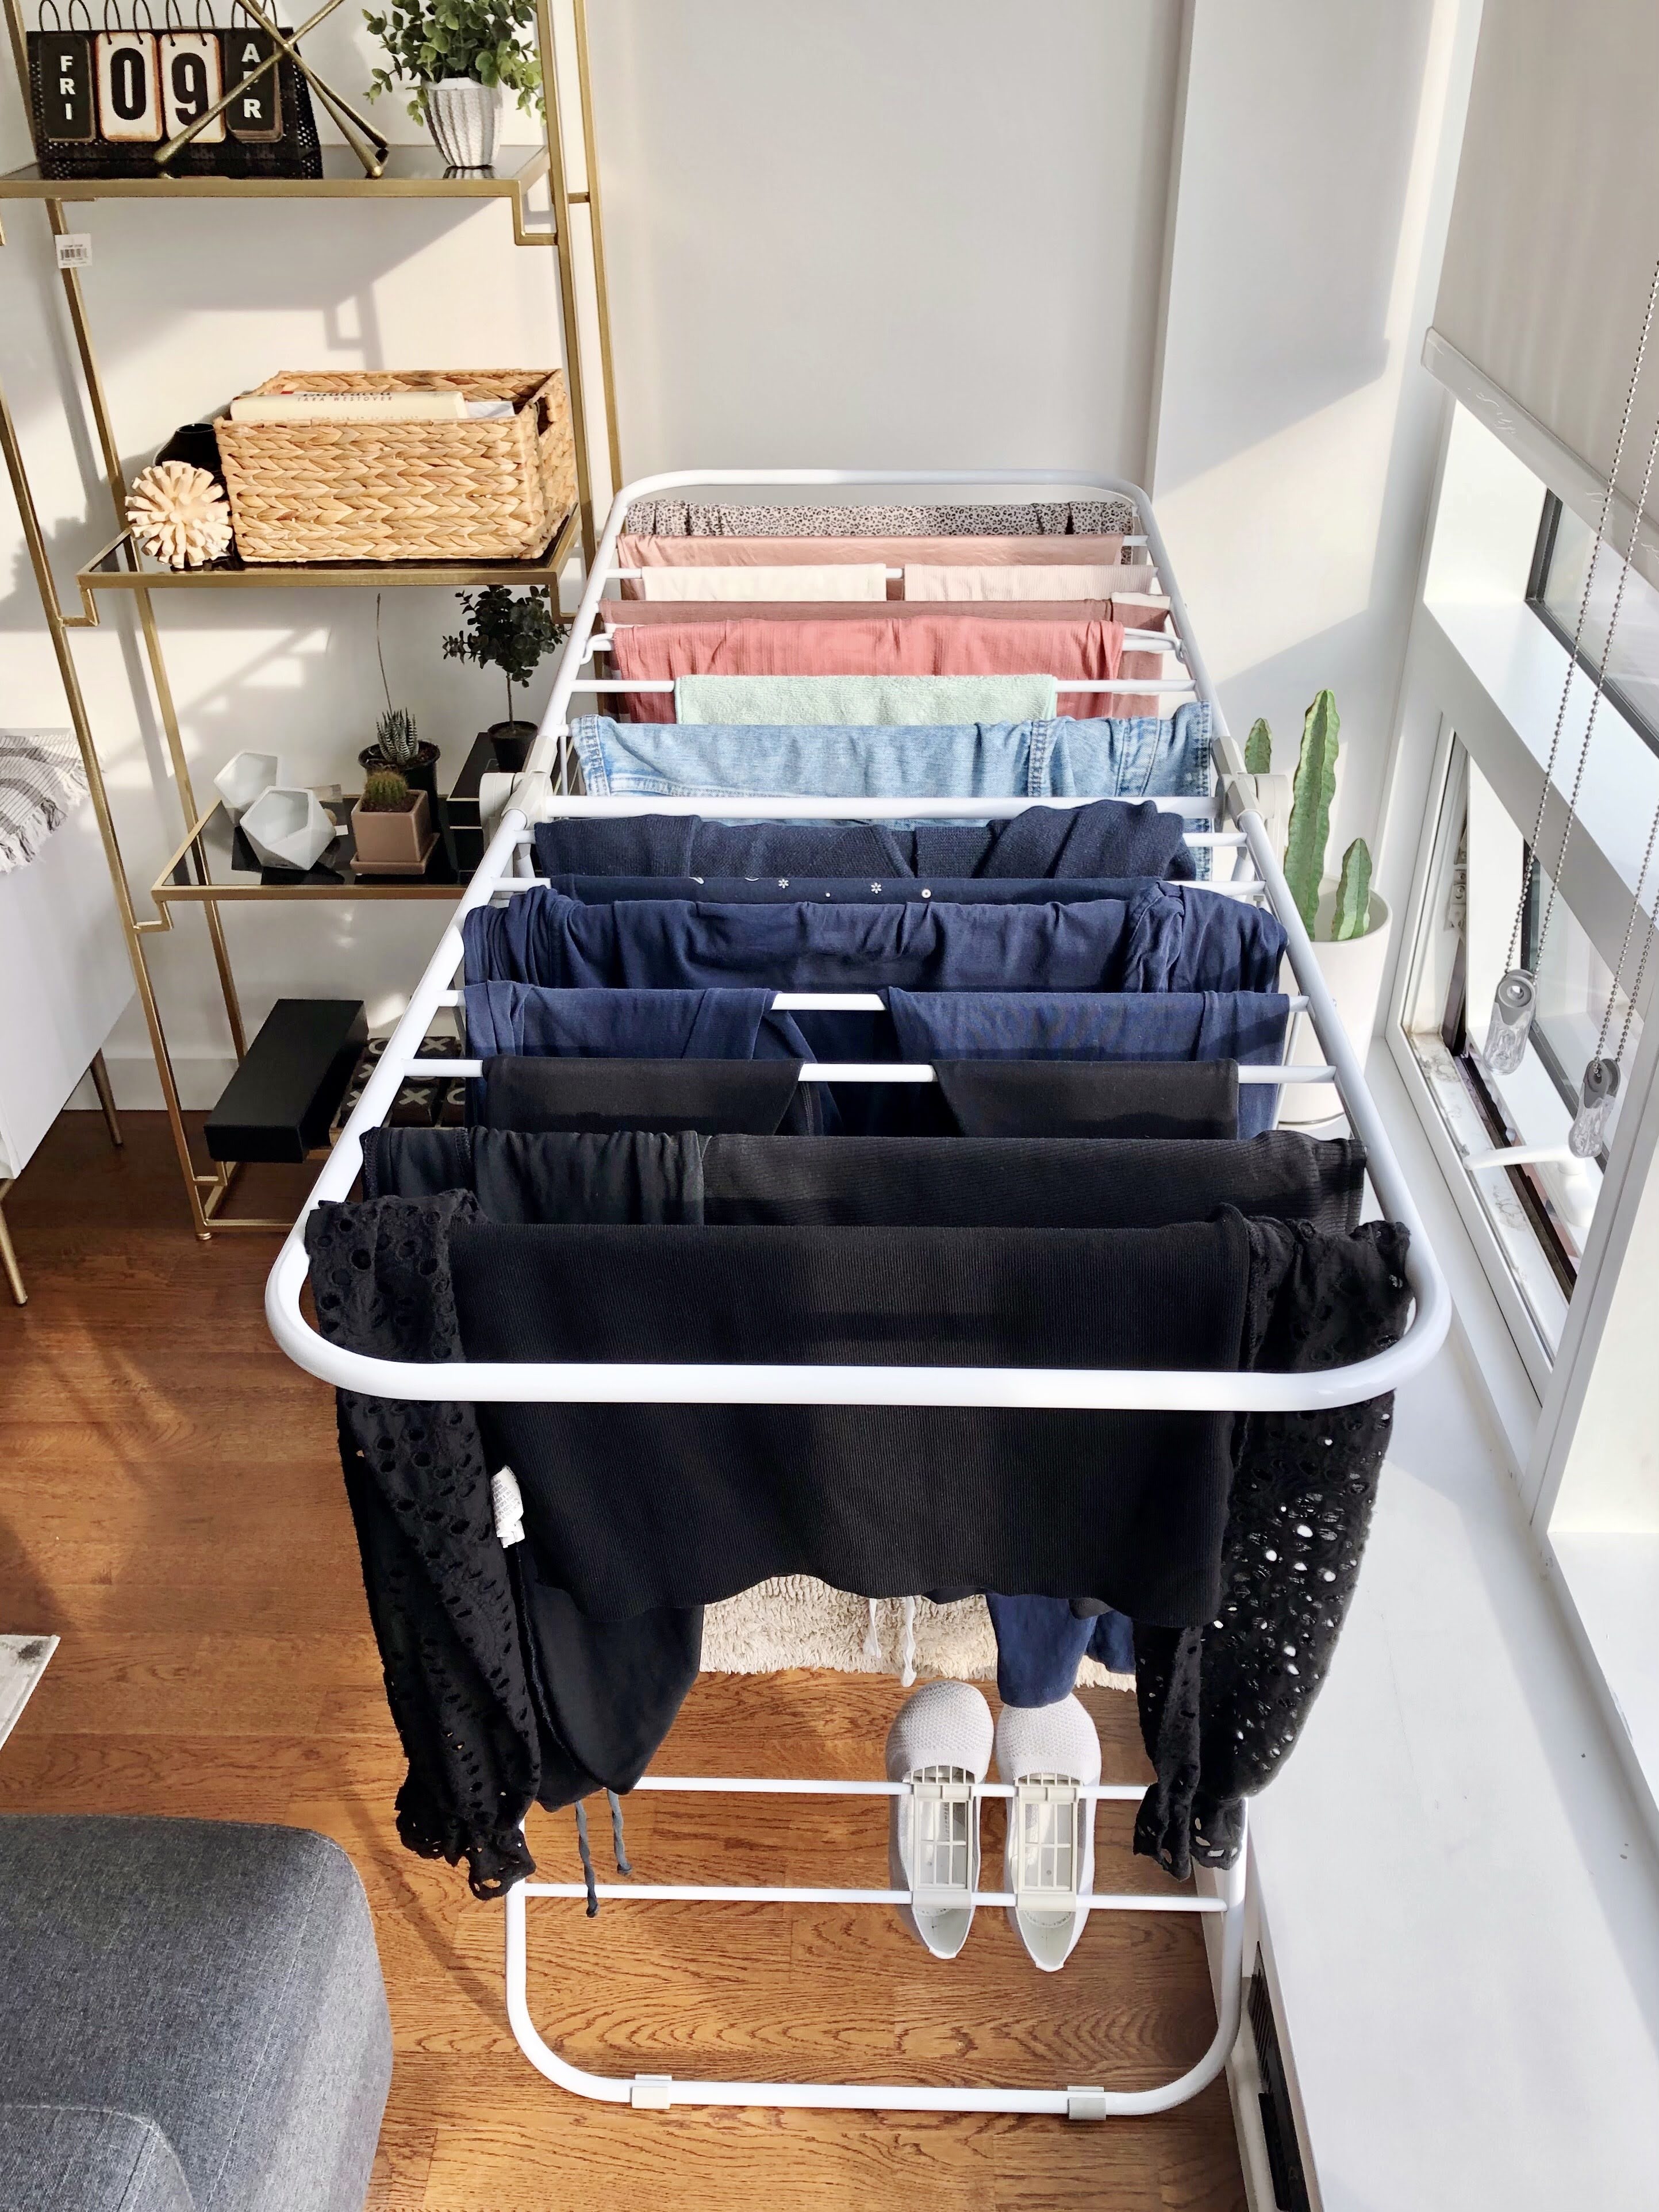 Top Tips For Drying Your Laundry Indoors - Heated Drying Racks